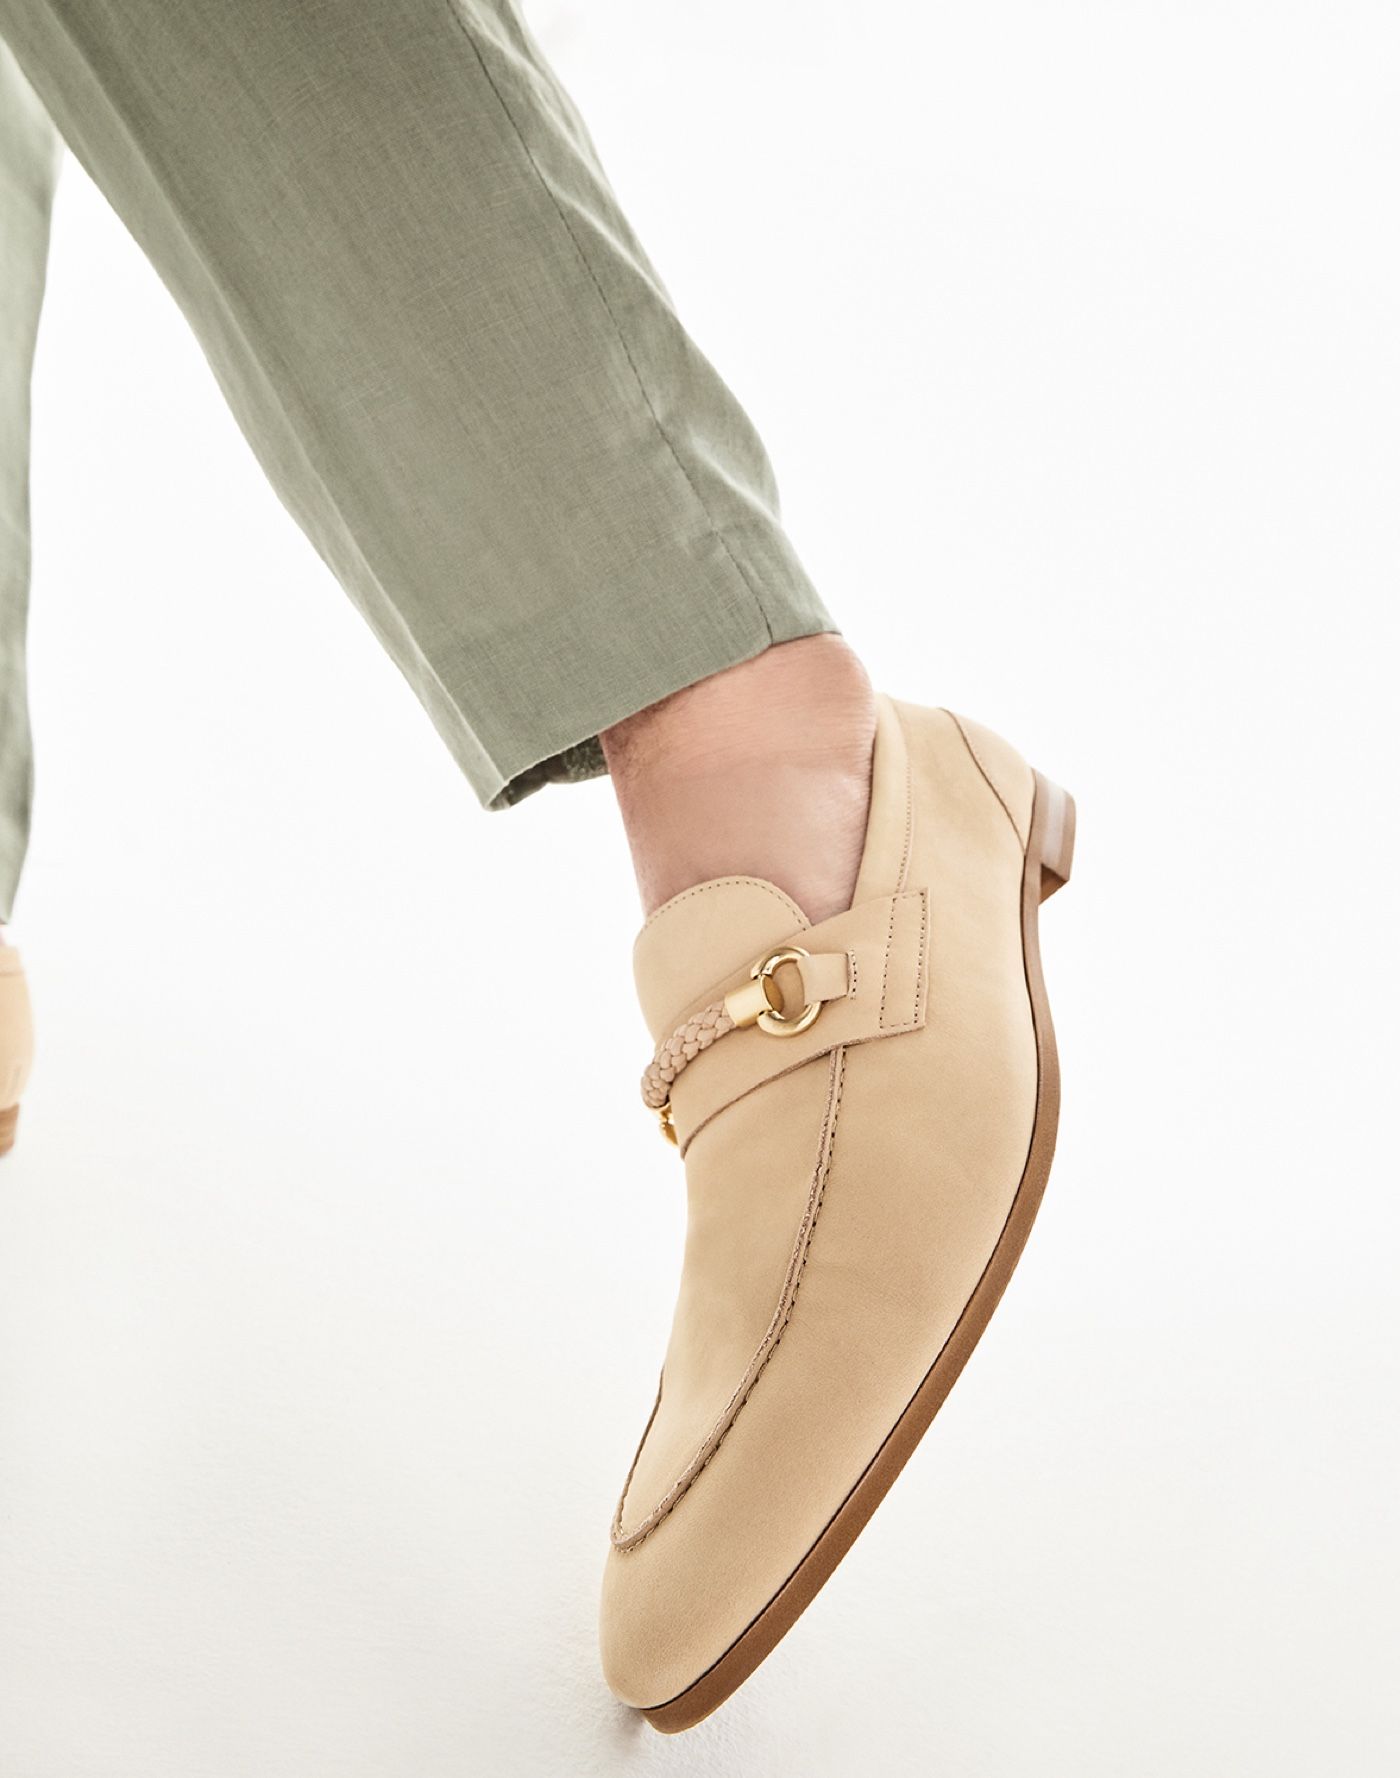 Men's Shoes, Sandals, Sneakers, Boots, and Accessories | ALDO US